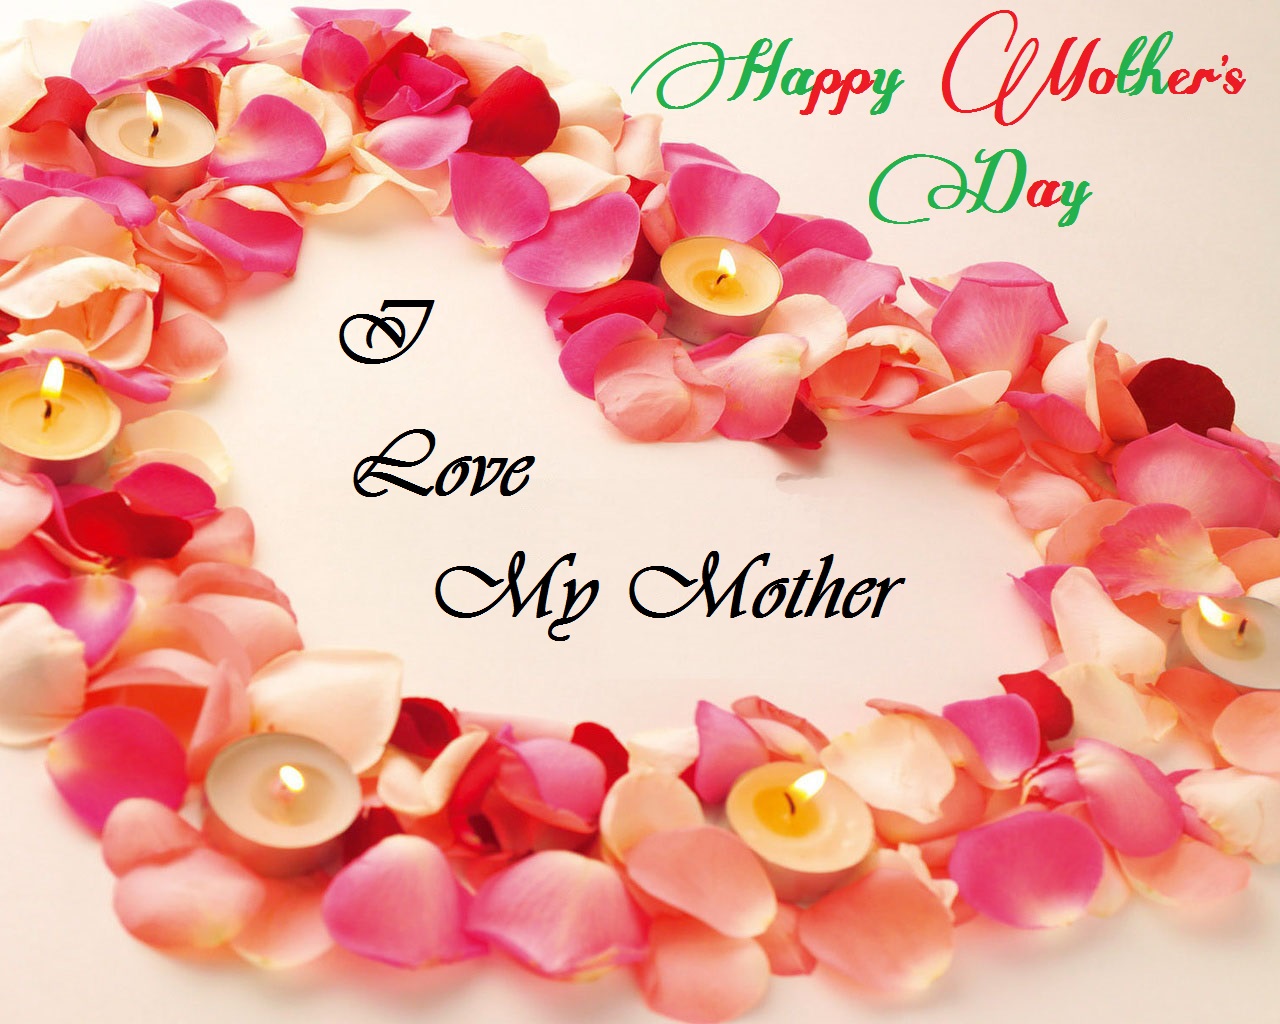 Happy Mothers Day Cards For Large Image